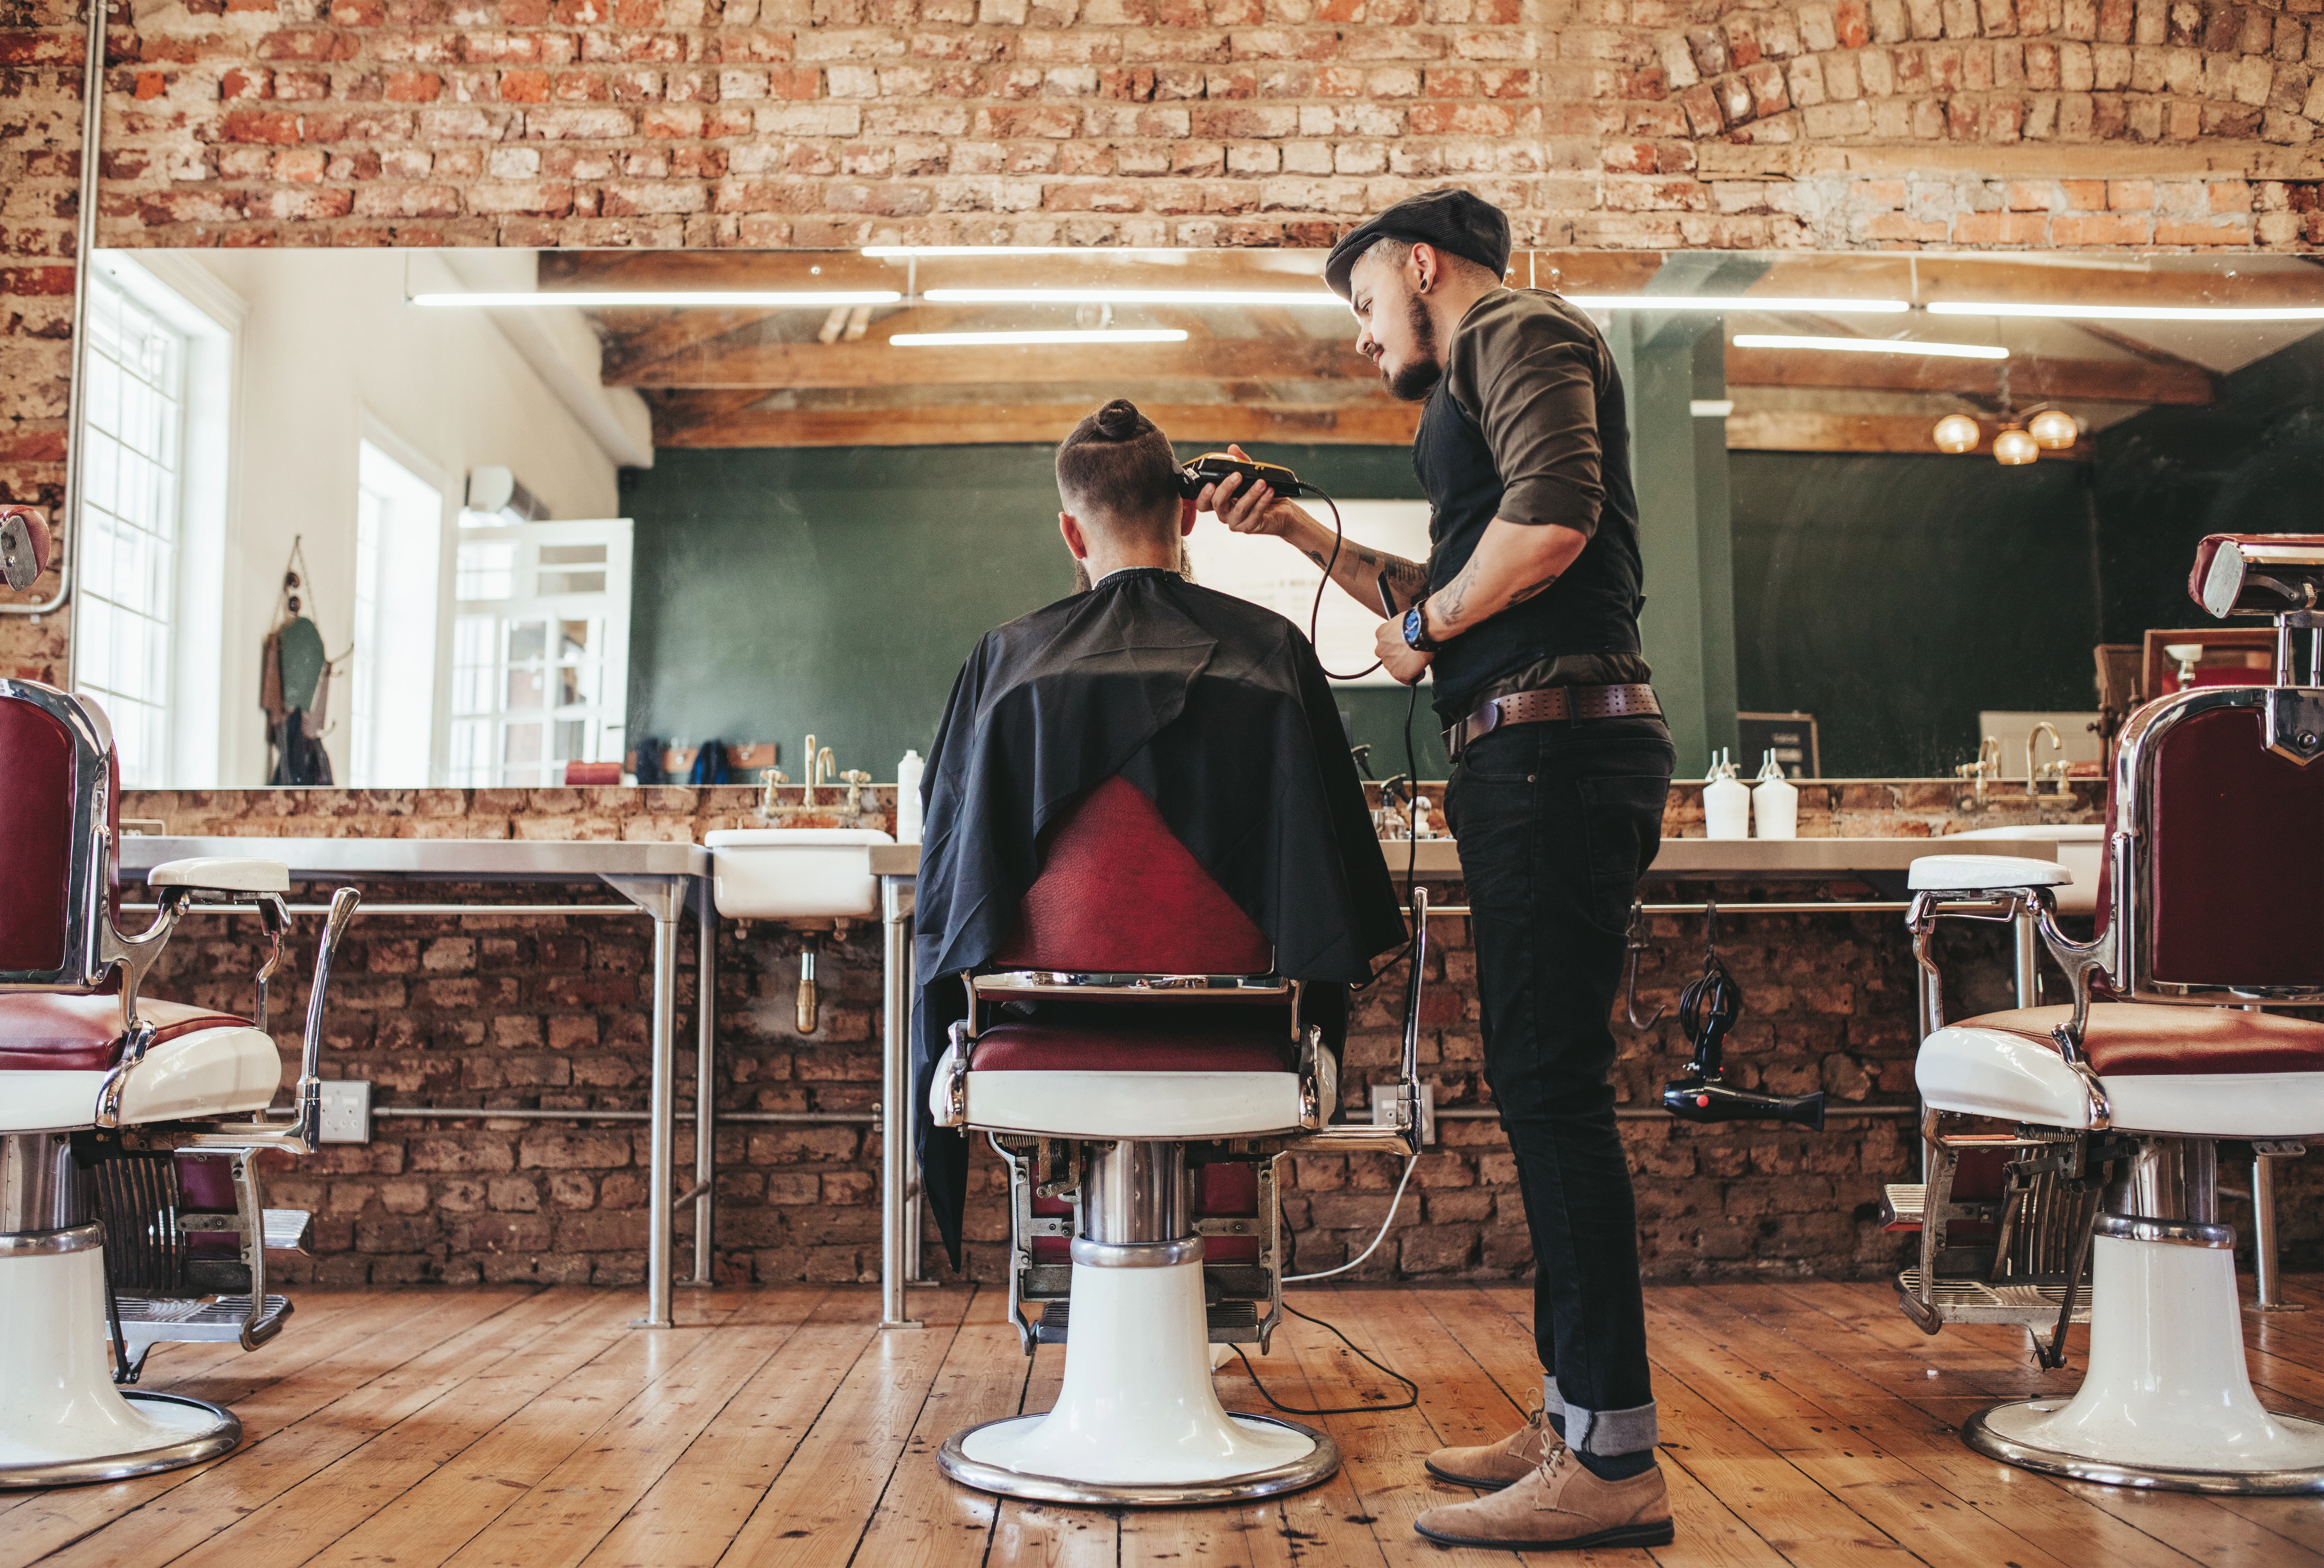 On-demand app TrimCheck connects barbers with customers